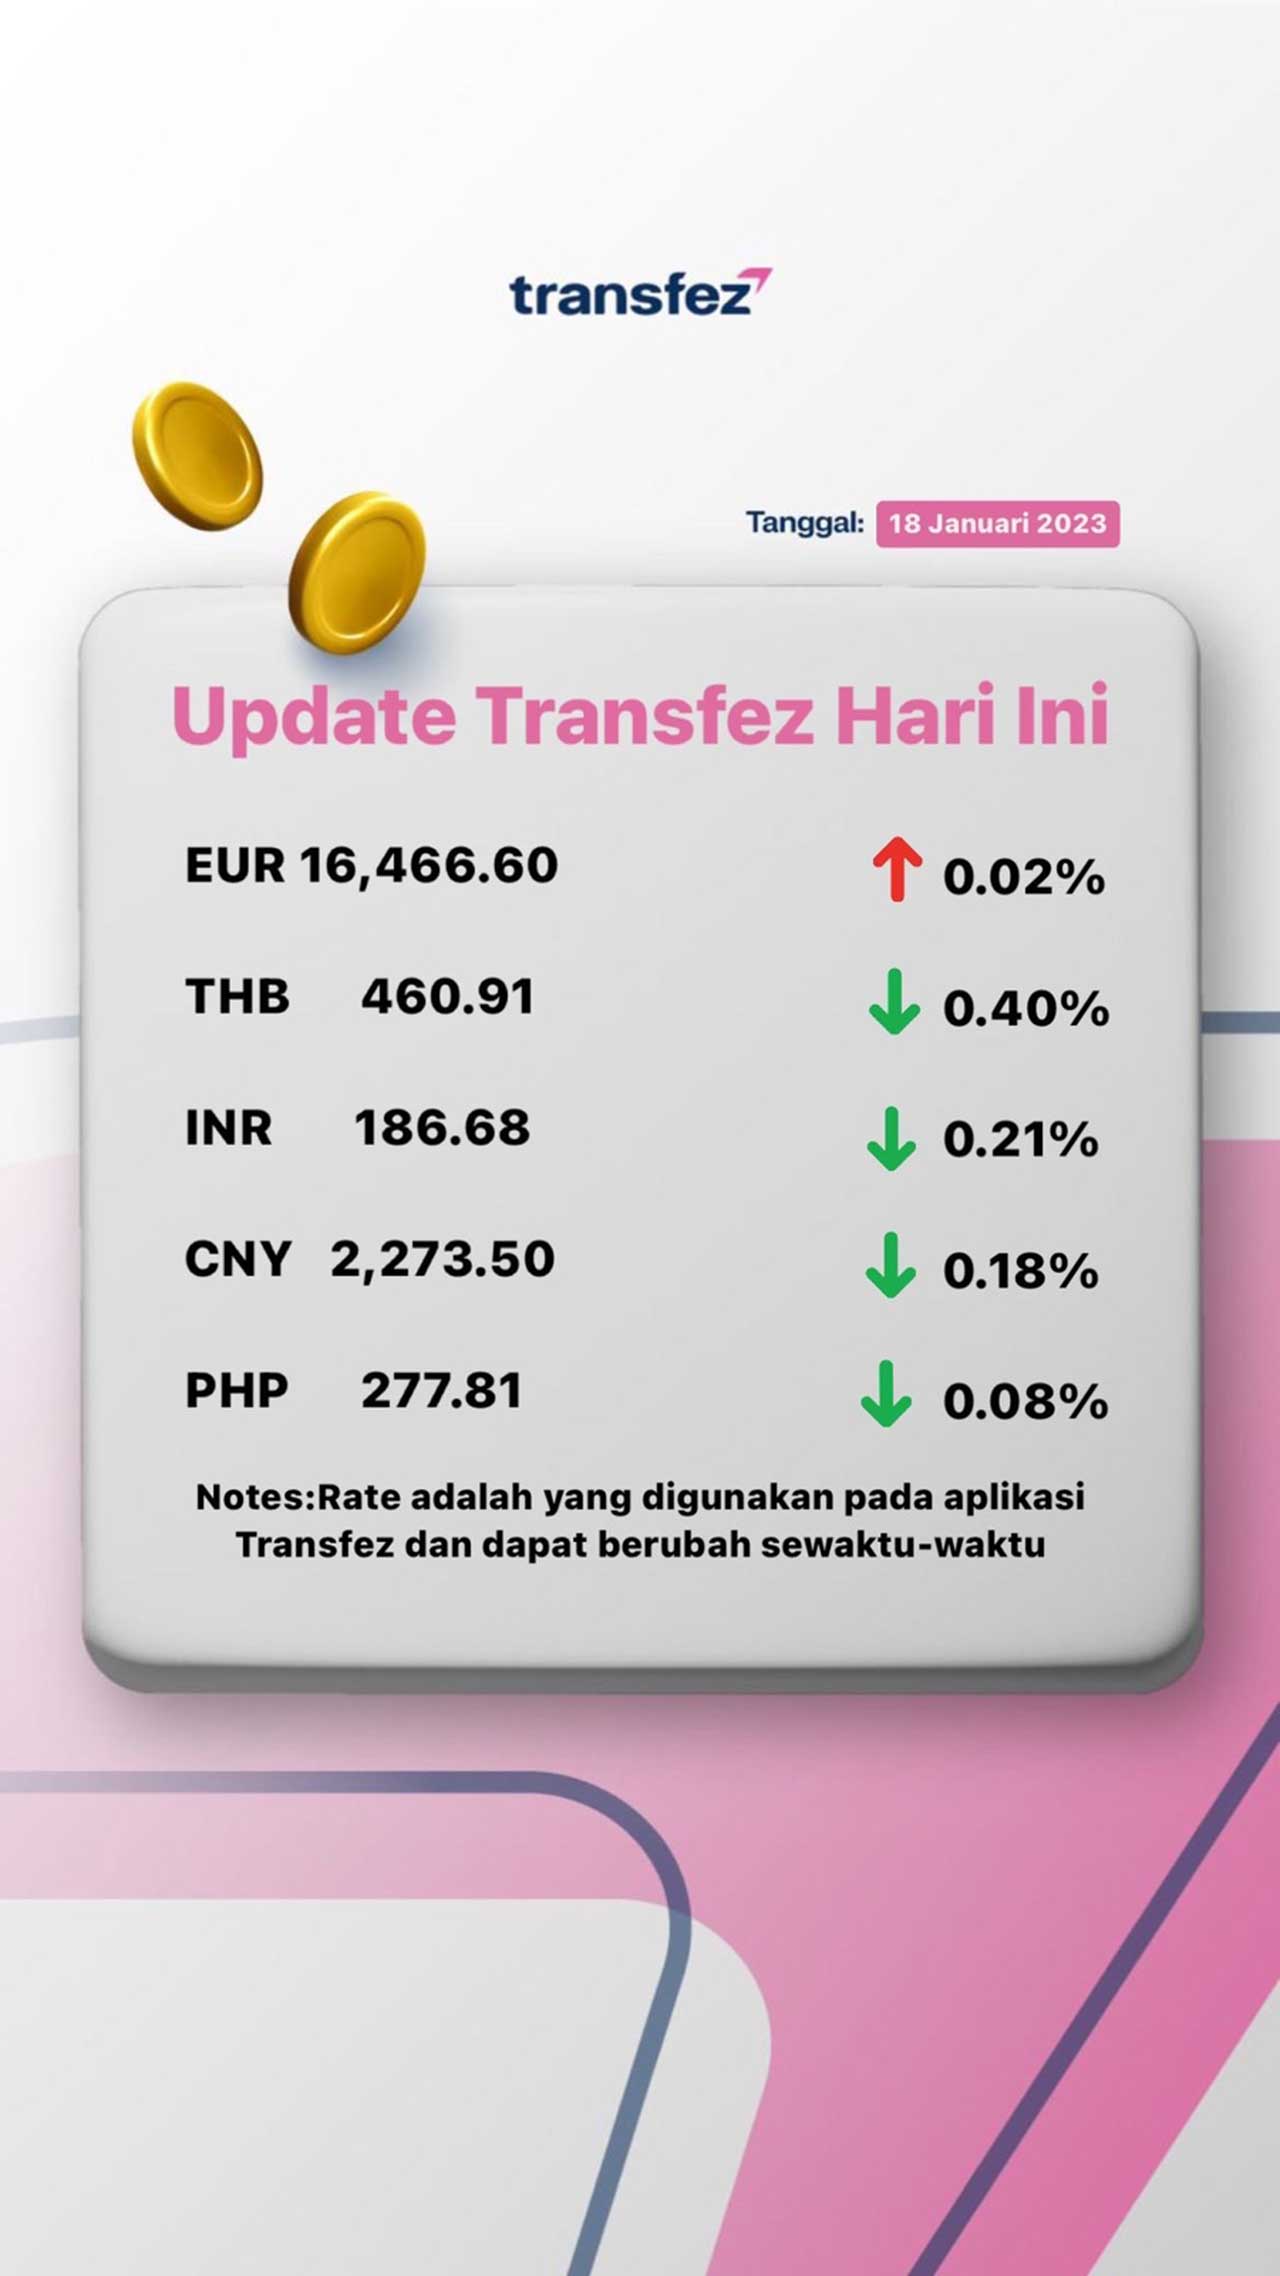 Today's Transfez Rate Update January 18 2023